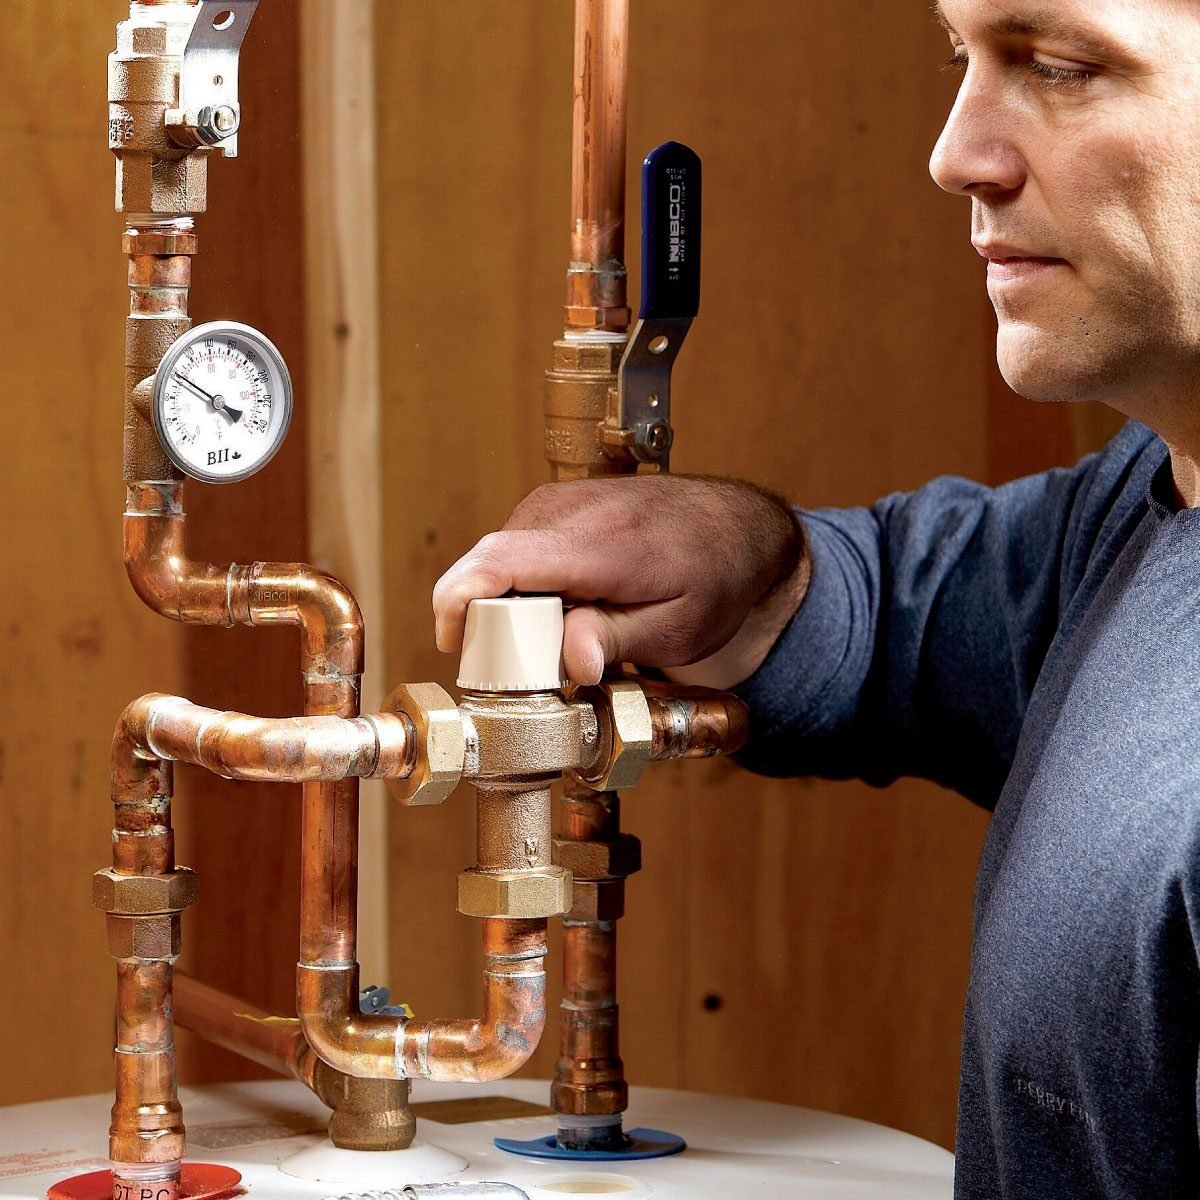 How To Install a Hot Water Regulator